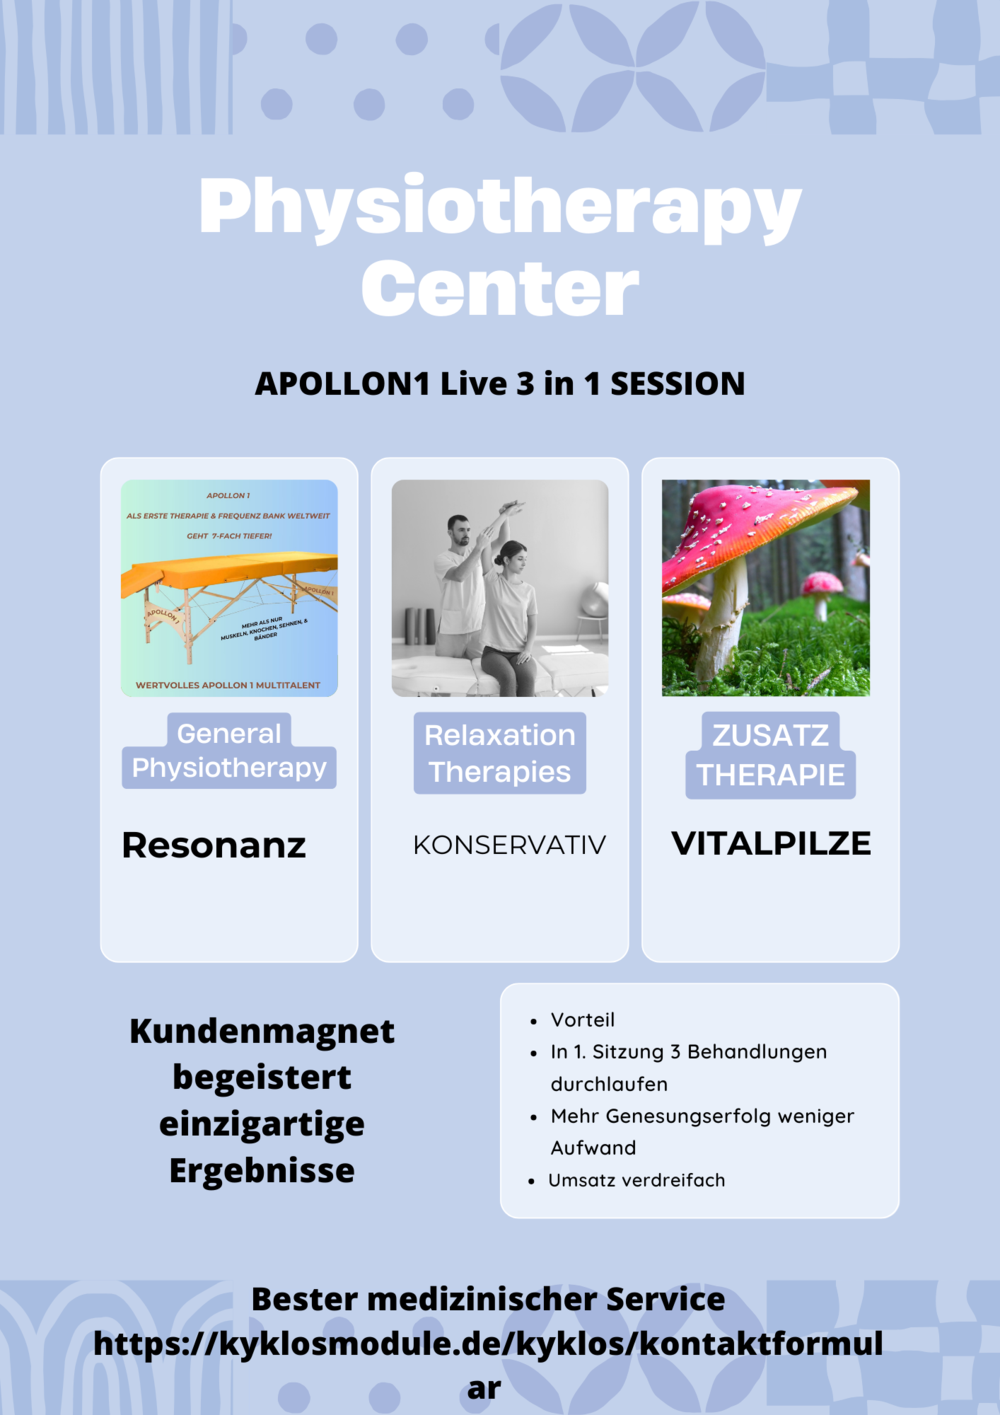 Apollon1_Health_Physiotherapy_Center_Flyer.png